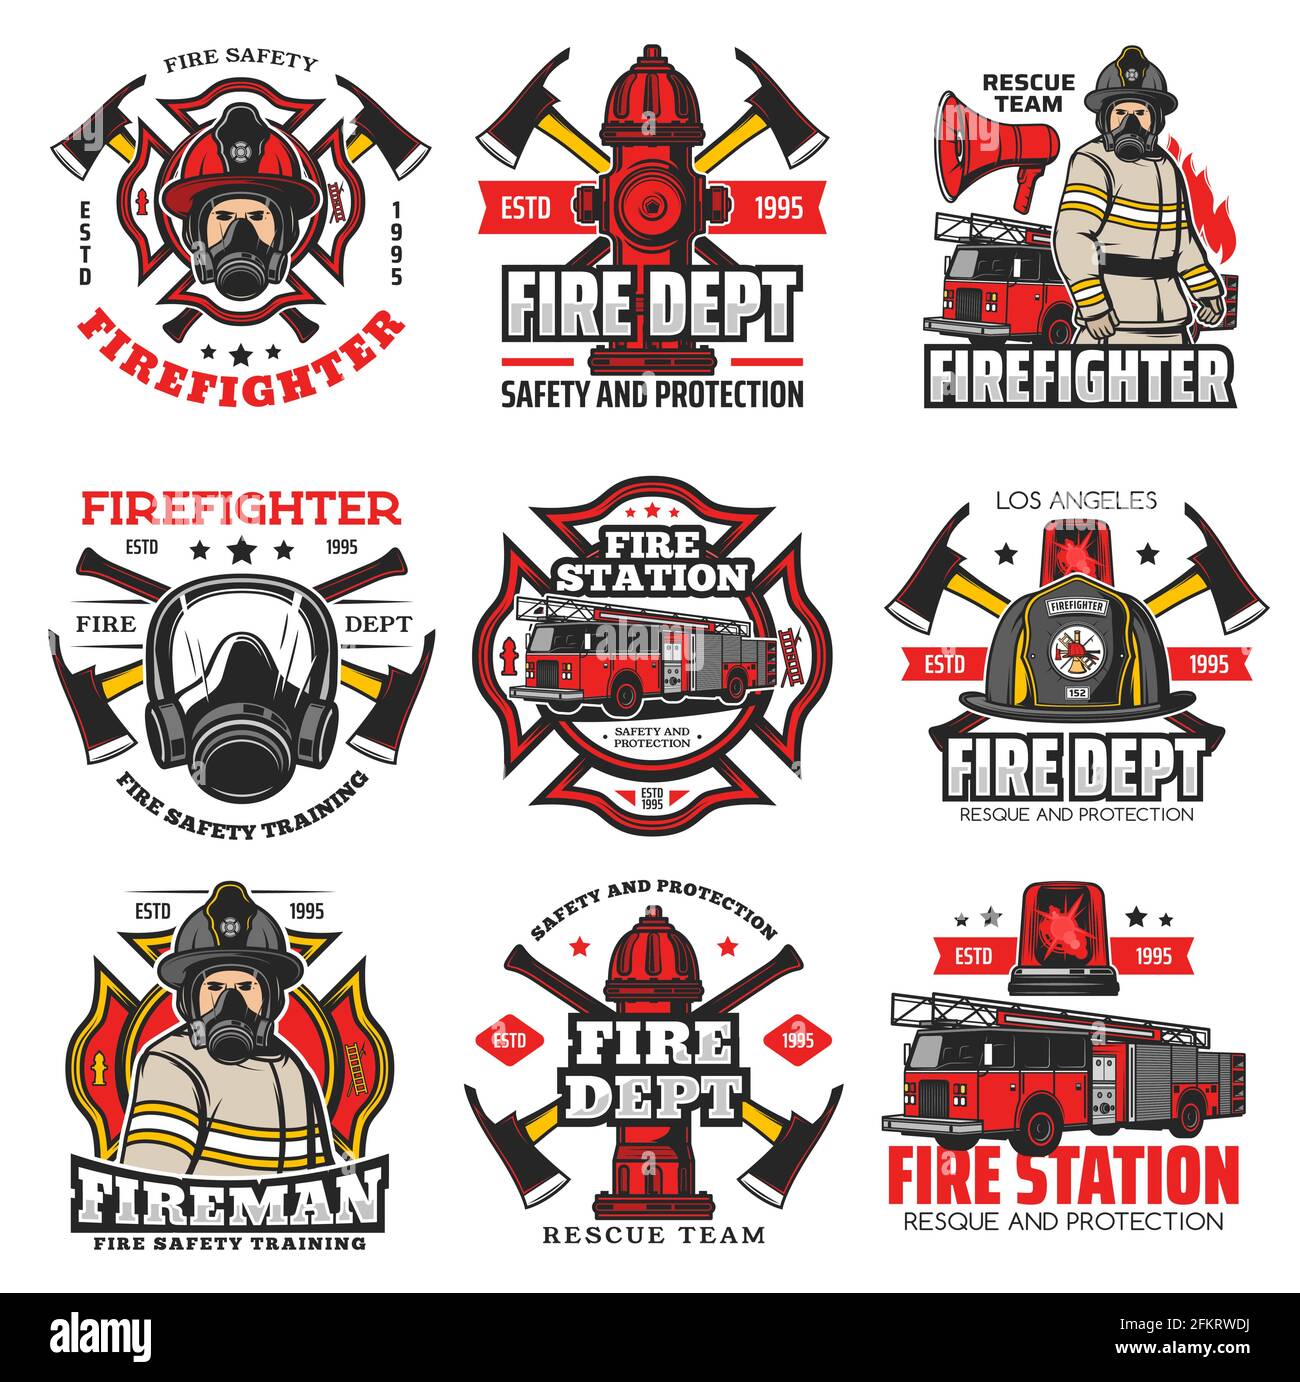 Firefighting icons, fire service retro emblems. Fire department station truck, fireman in helmet and gasmask, water hydrant, axes. Firefighters maltes Stock Vector